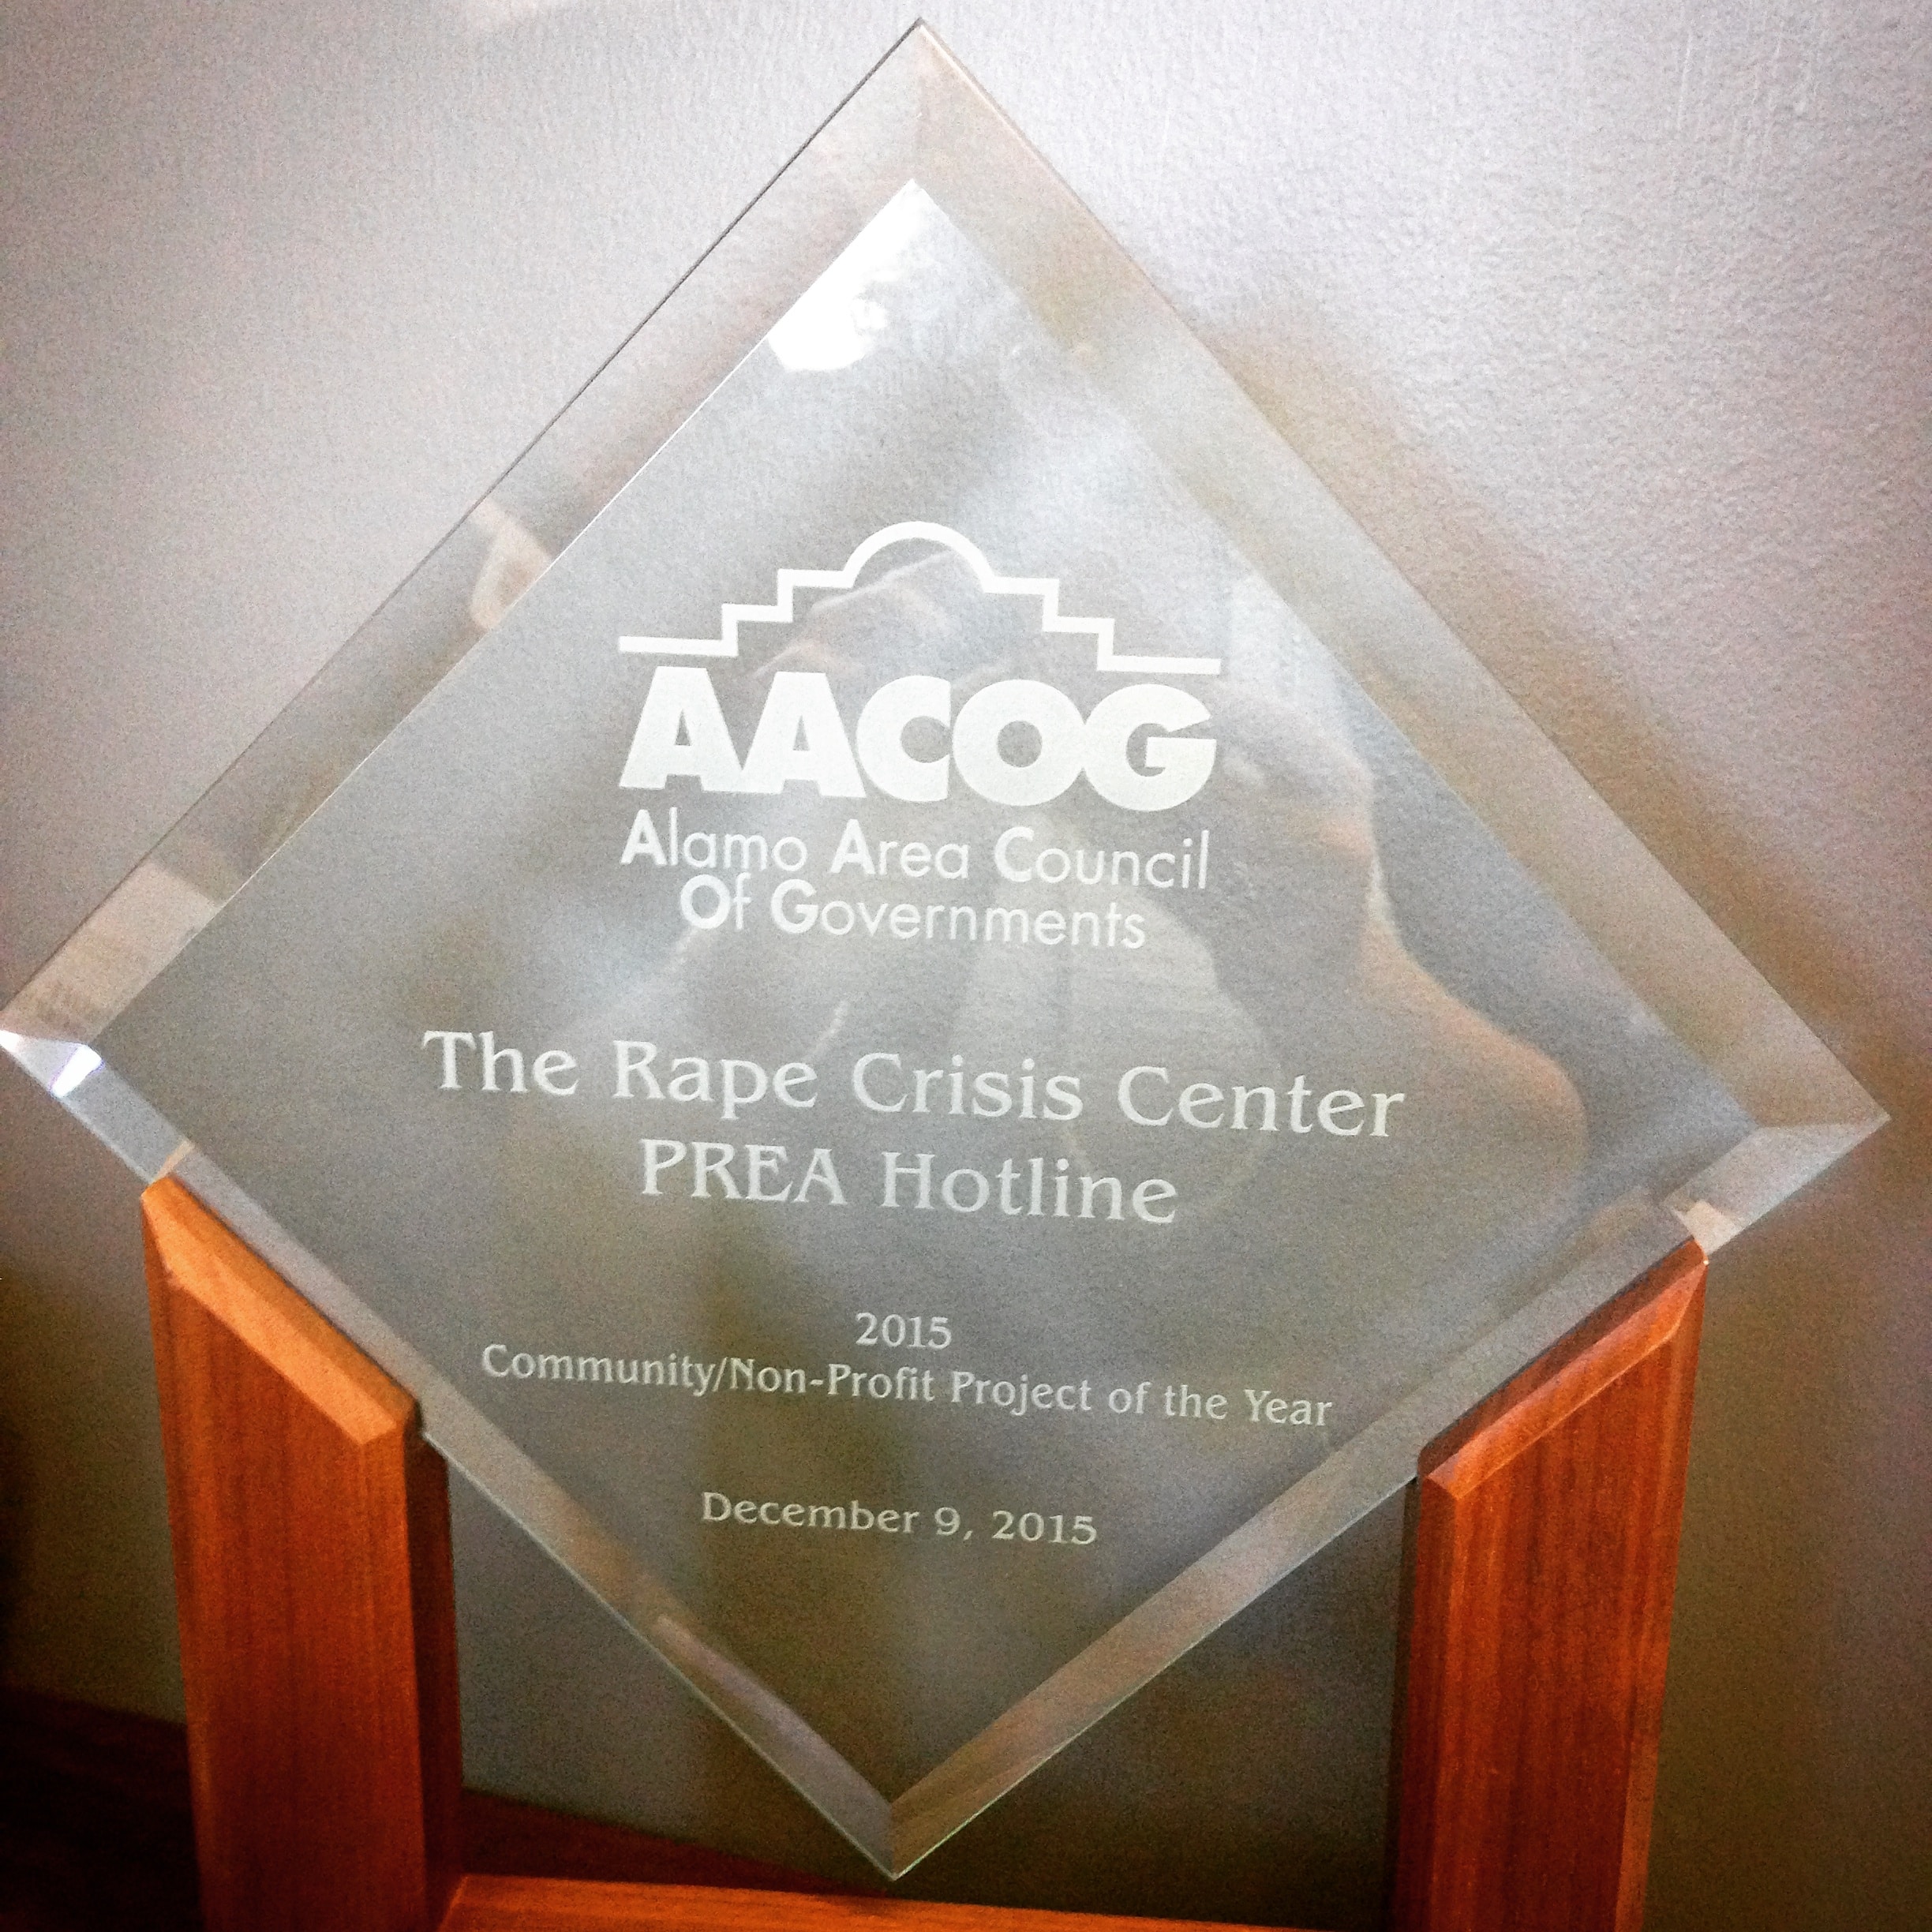 The Rape Crisis Center’s PREA hotline awarded “Community Project of the Year”